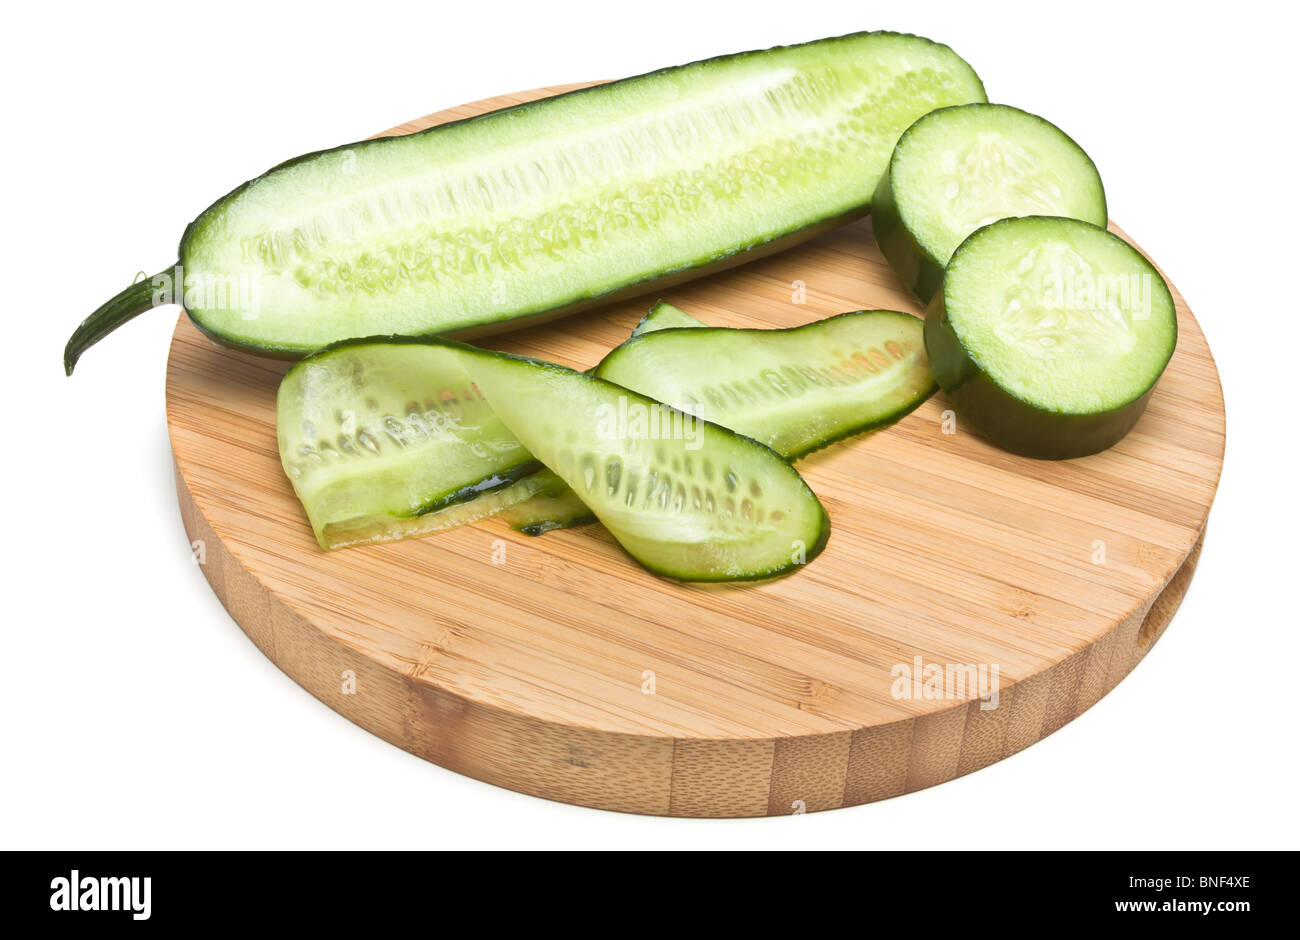 Sliced ribbons of Cucumber from low perspective on wooden bamboo chopping board. Stock Photo